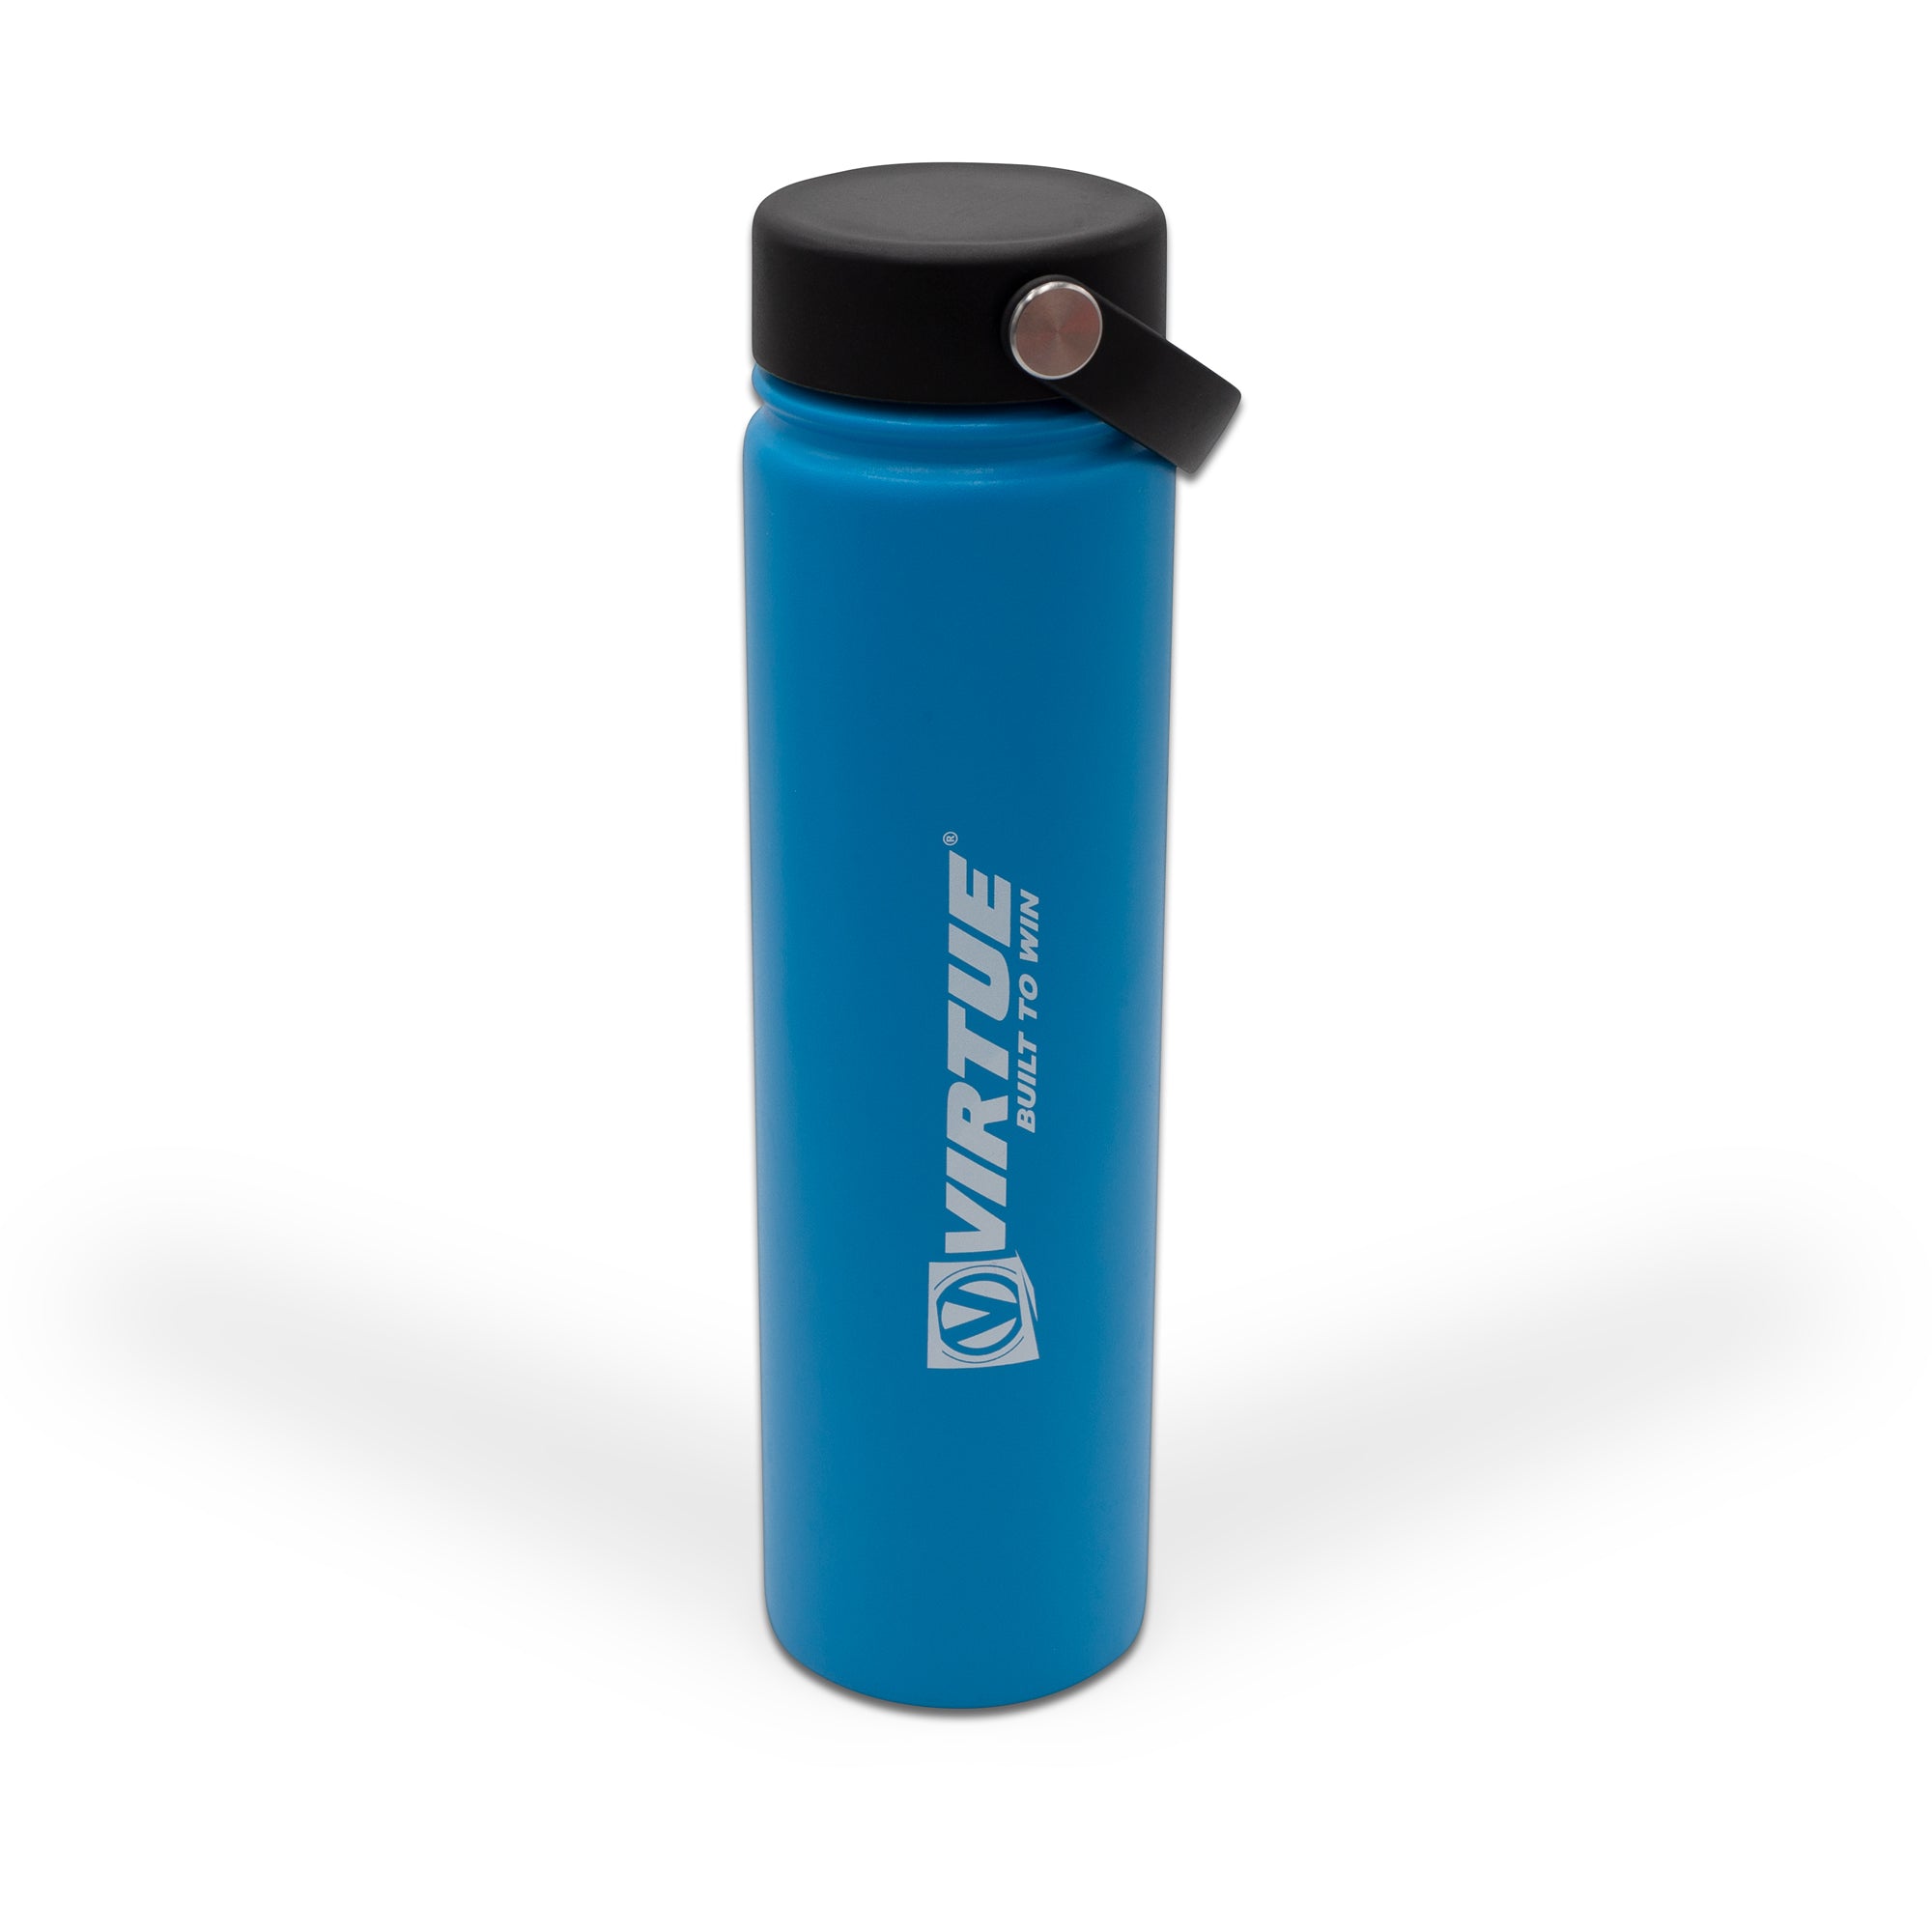 Virtue Stainless Steel 24Hr Cool Water Bottle - 24oz - Blue